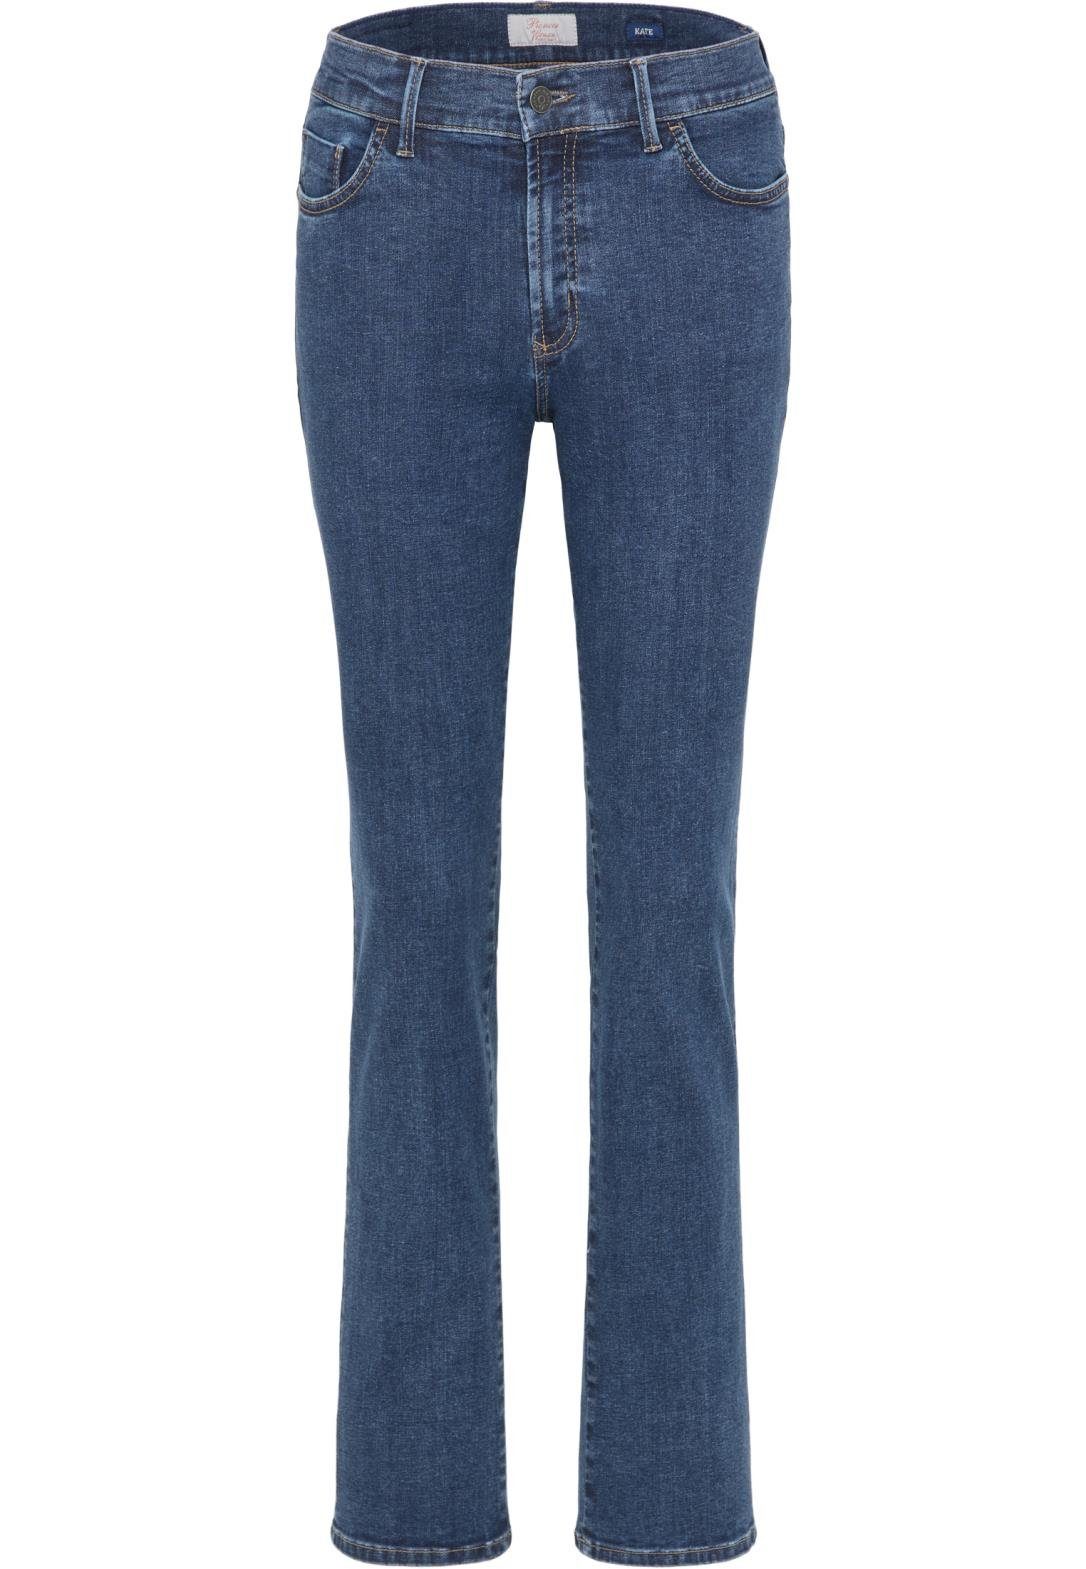 4010.05 Jeans POWERSTRETCH blue Authentic - PIONEER 3213 Pioneer mid KATE Stretch-Jeans